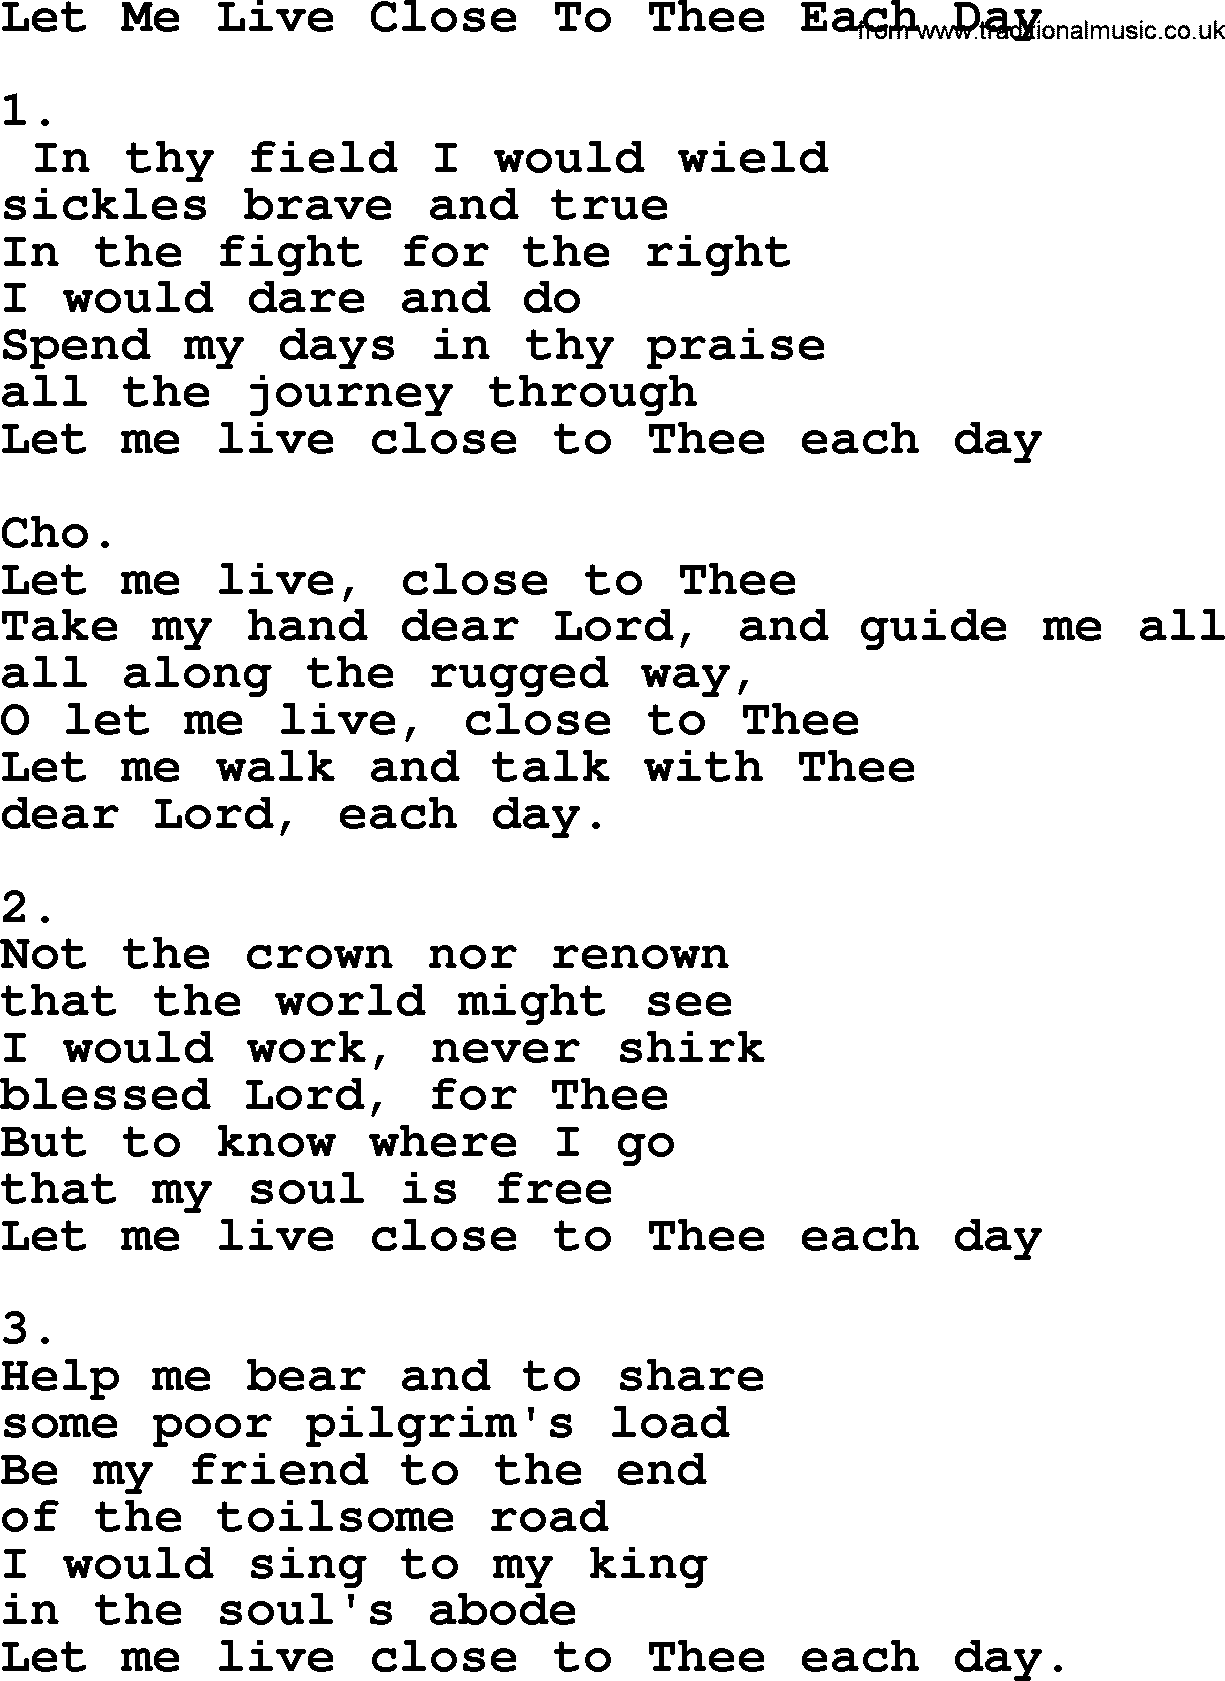 Apostolic & Pentecostal Hymns and Songs, Hymn: Let Me Live Close To Thee Each Day lyrics and PDF